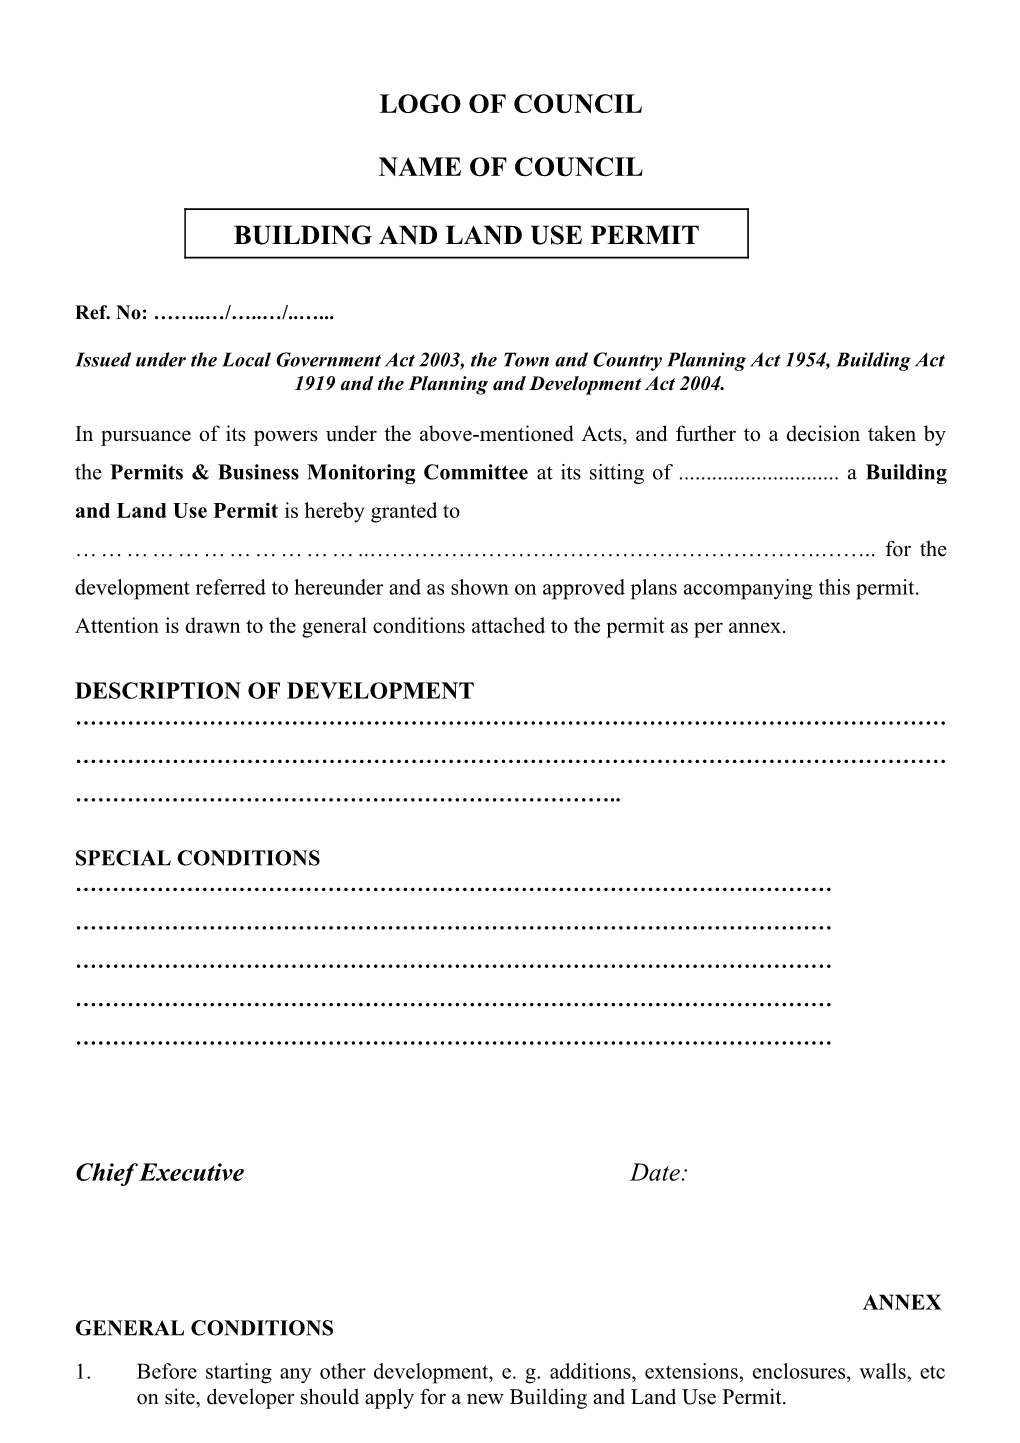 Building and Land Use Permit